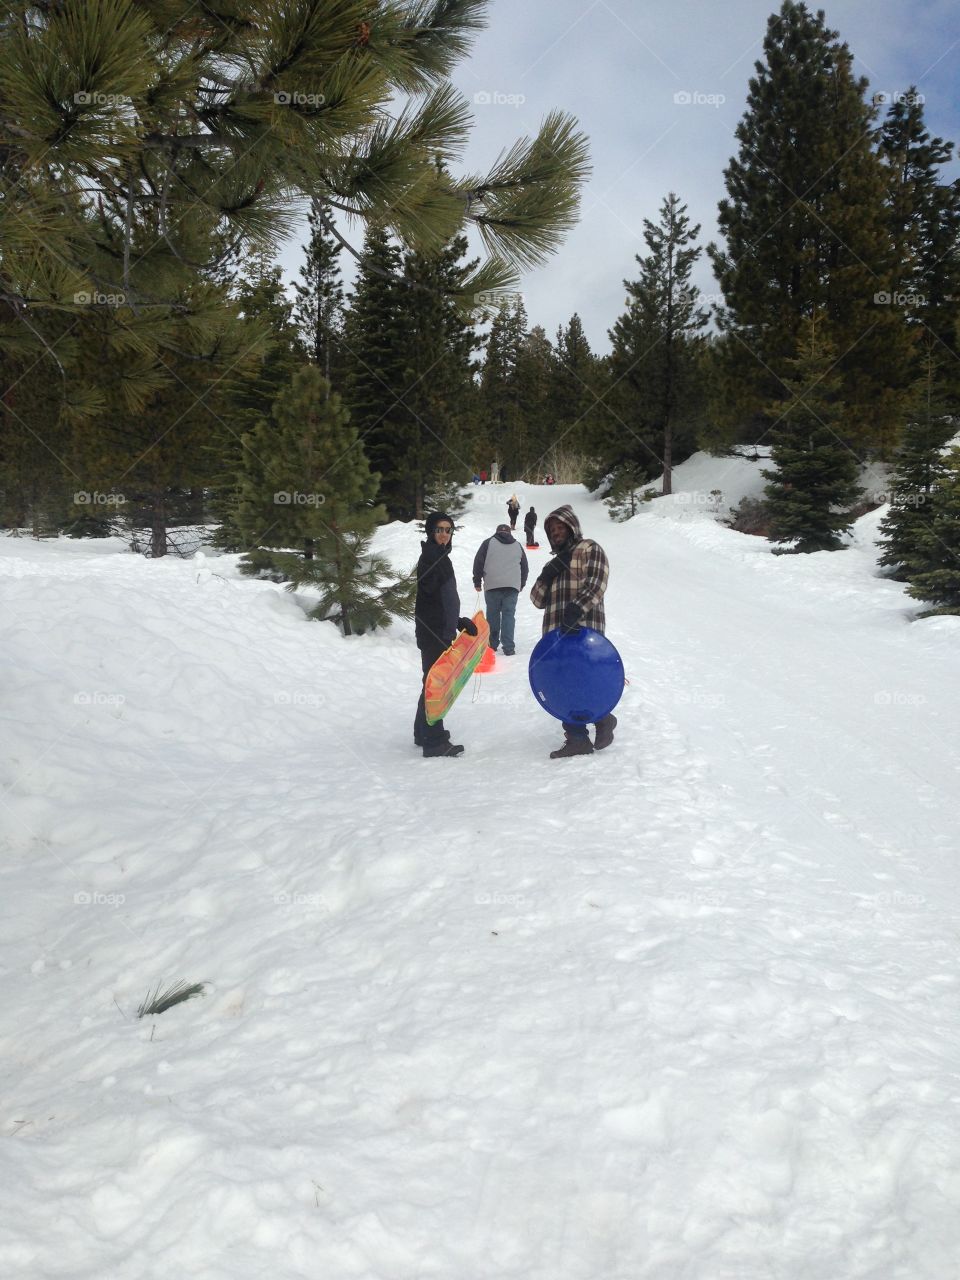 Friends can be family as well. They are sledding down the slopes together.